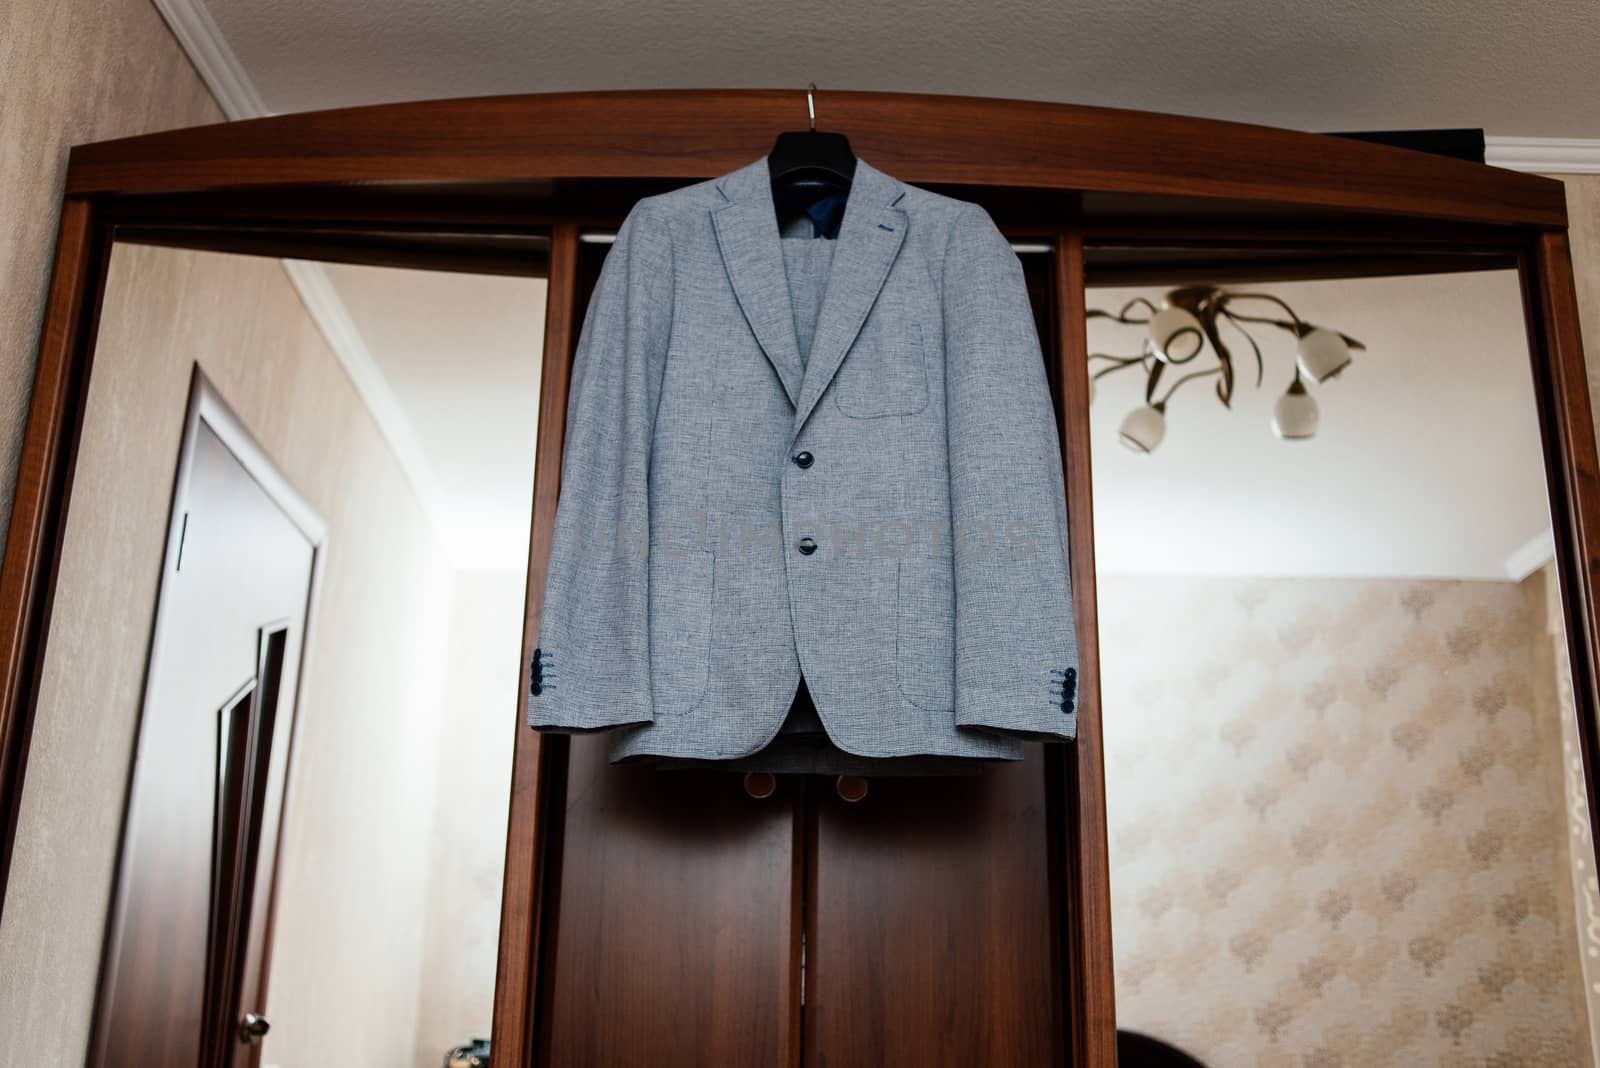 Beautiful gray groom's suit hanging on the wardrobe in the room